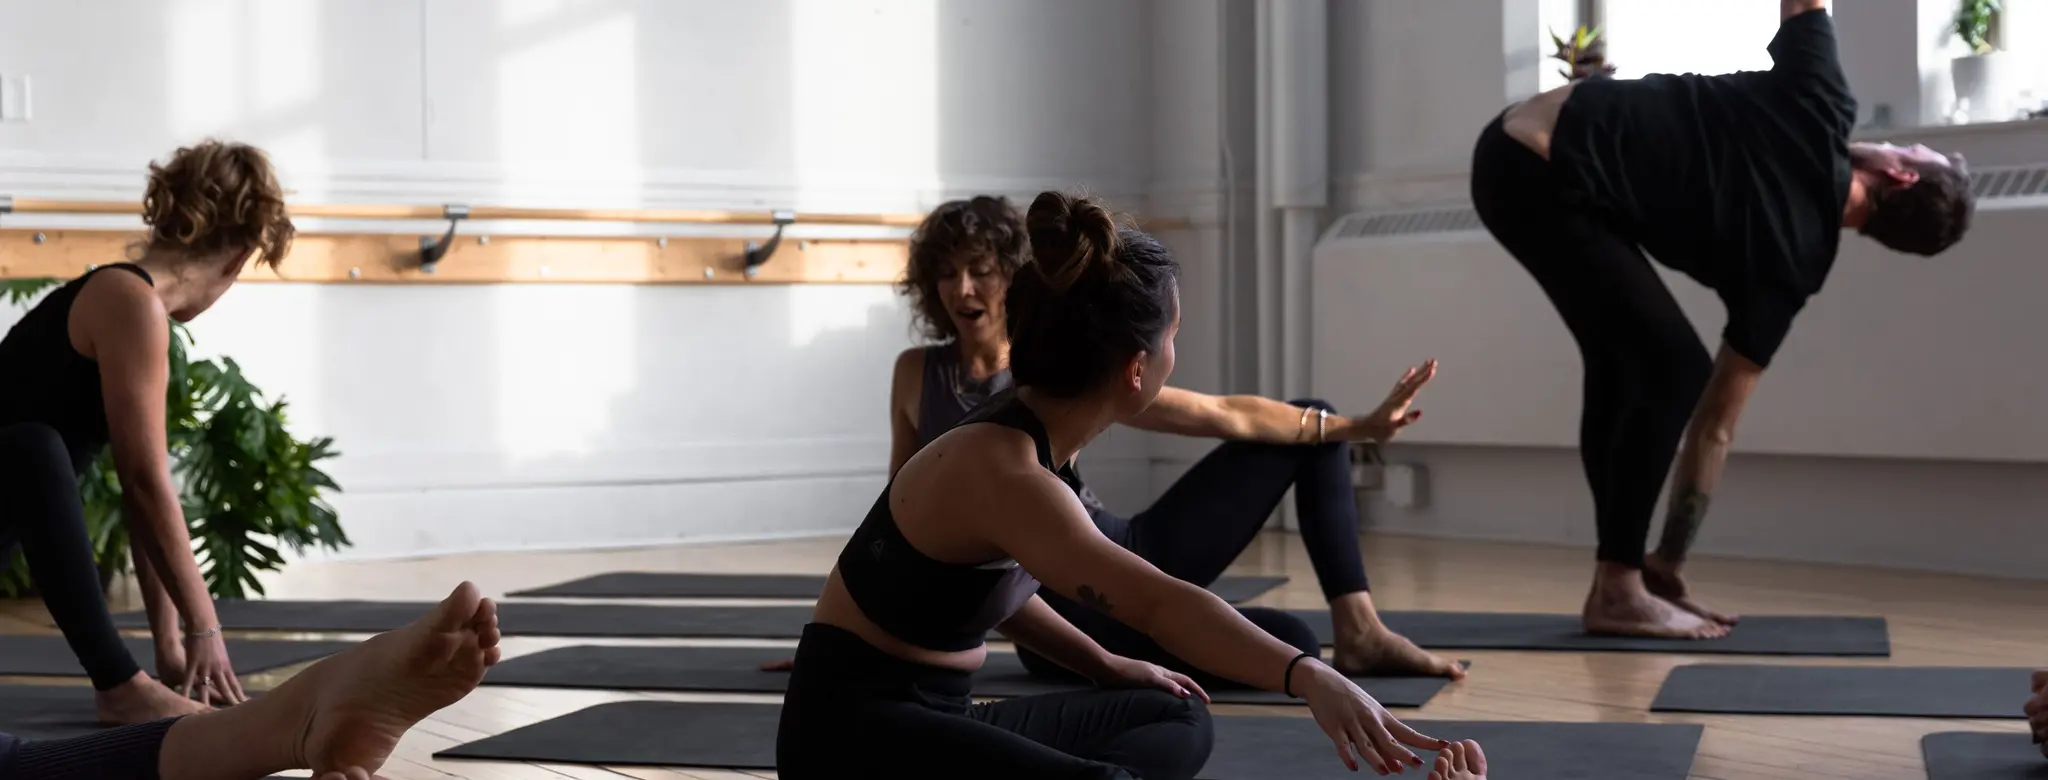 yogis and yoginis in a studio practicing yoga